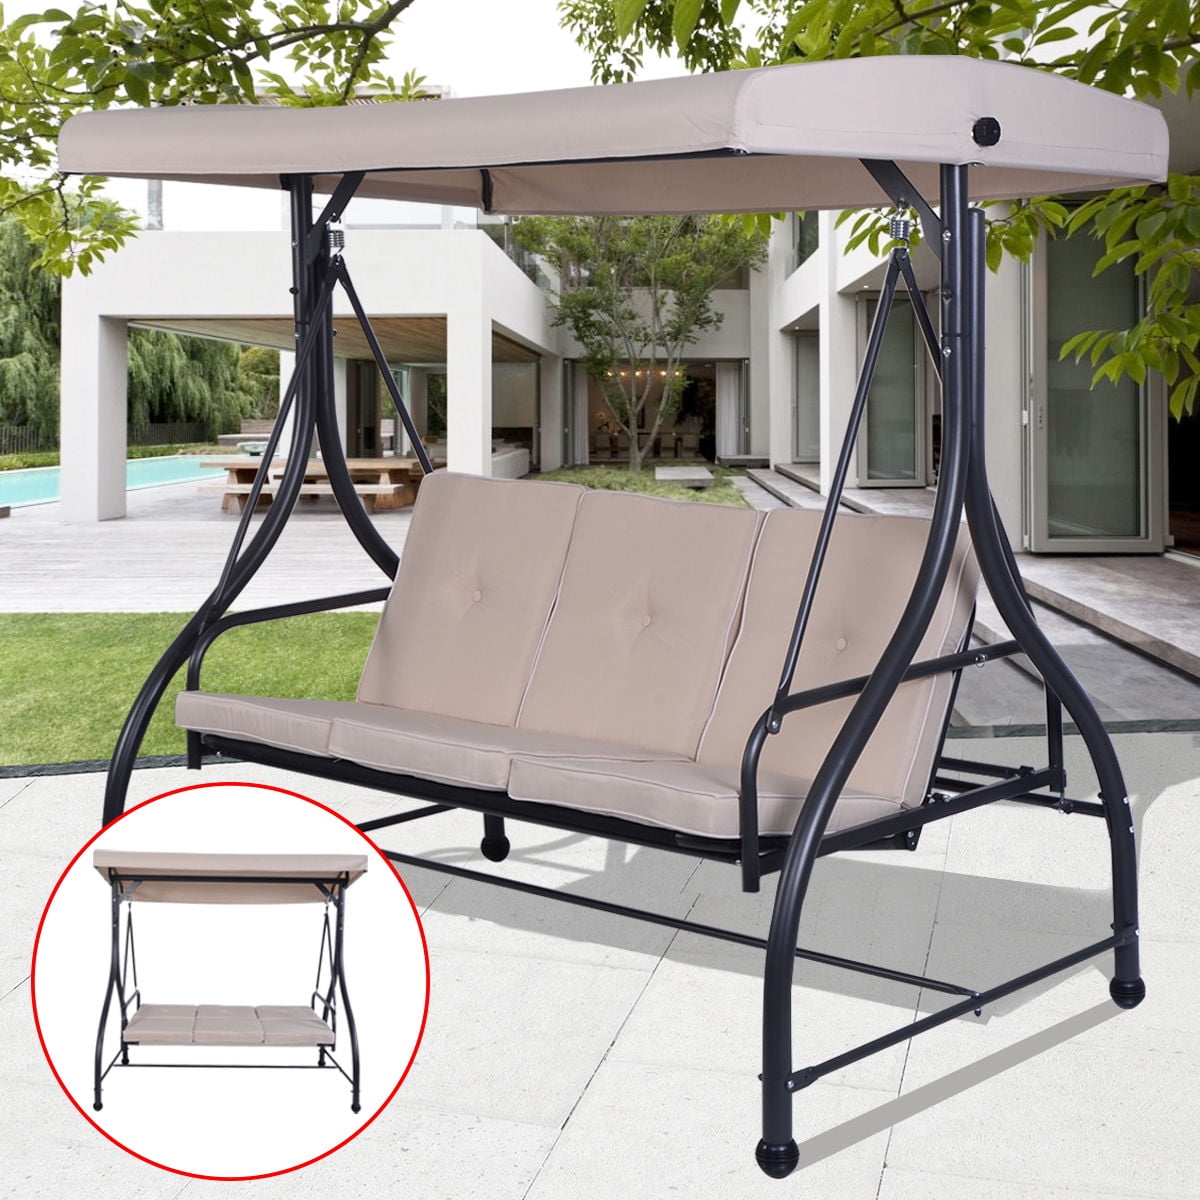 Tangkula 3 Seats Converting Patio Swing Outdoor Porch Garden Canopy Swing with Comfortable Cushion Seats & Adjustable Tilt Canopy Beige Heavy Duty Hammock 3 Persons Porch Swing 